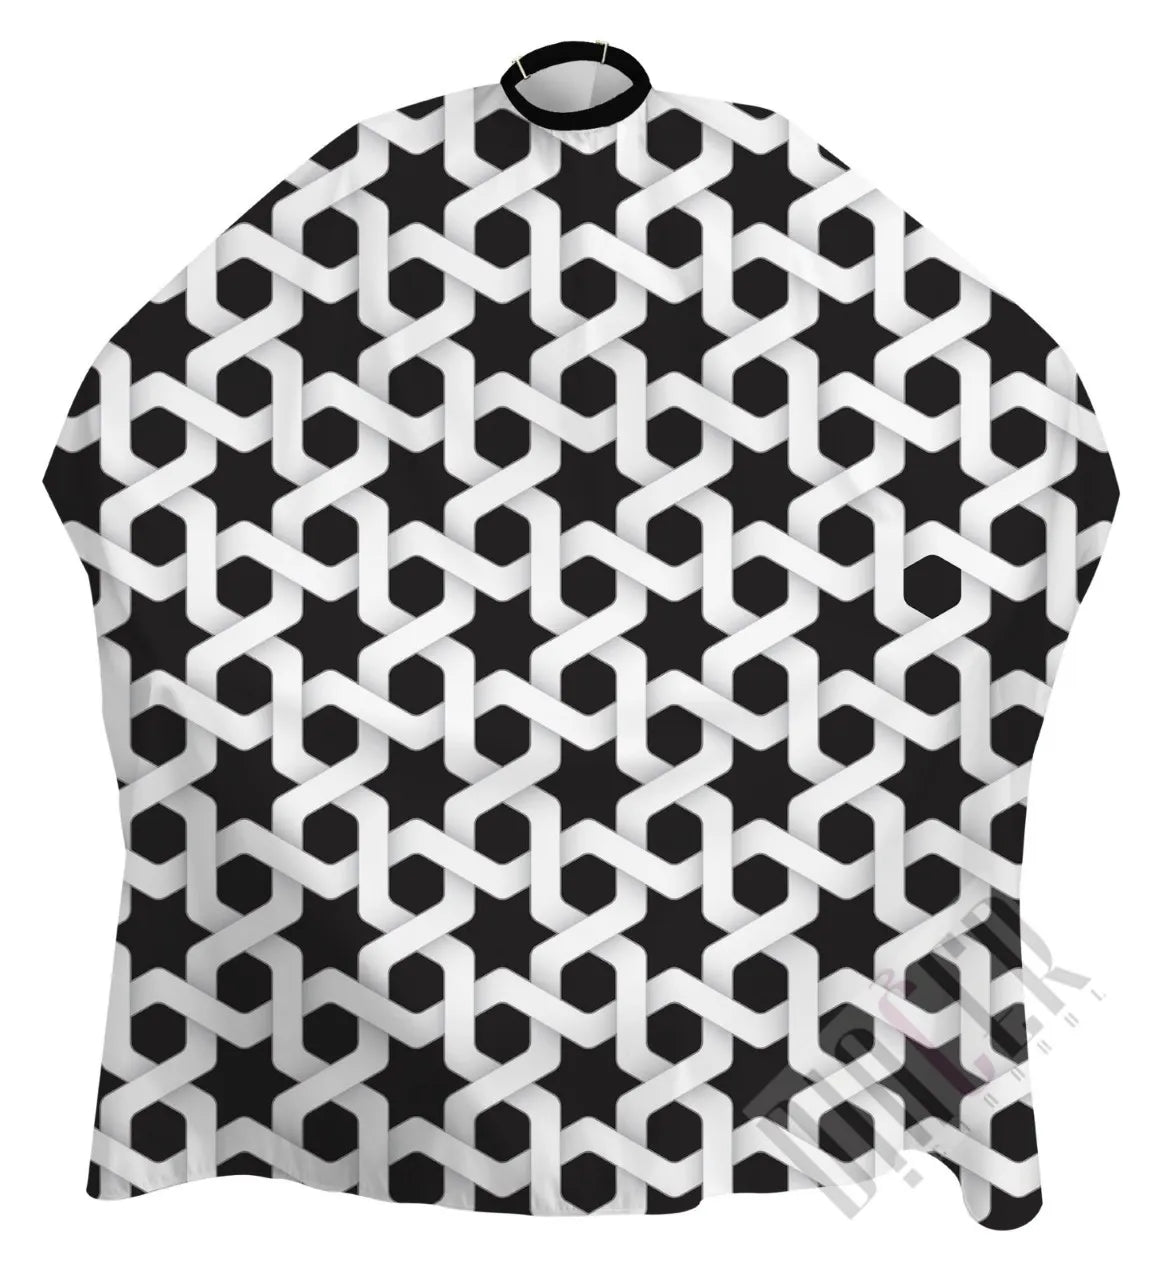 Dincer Cutting Cape- Black and White overlapping design